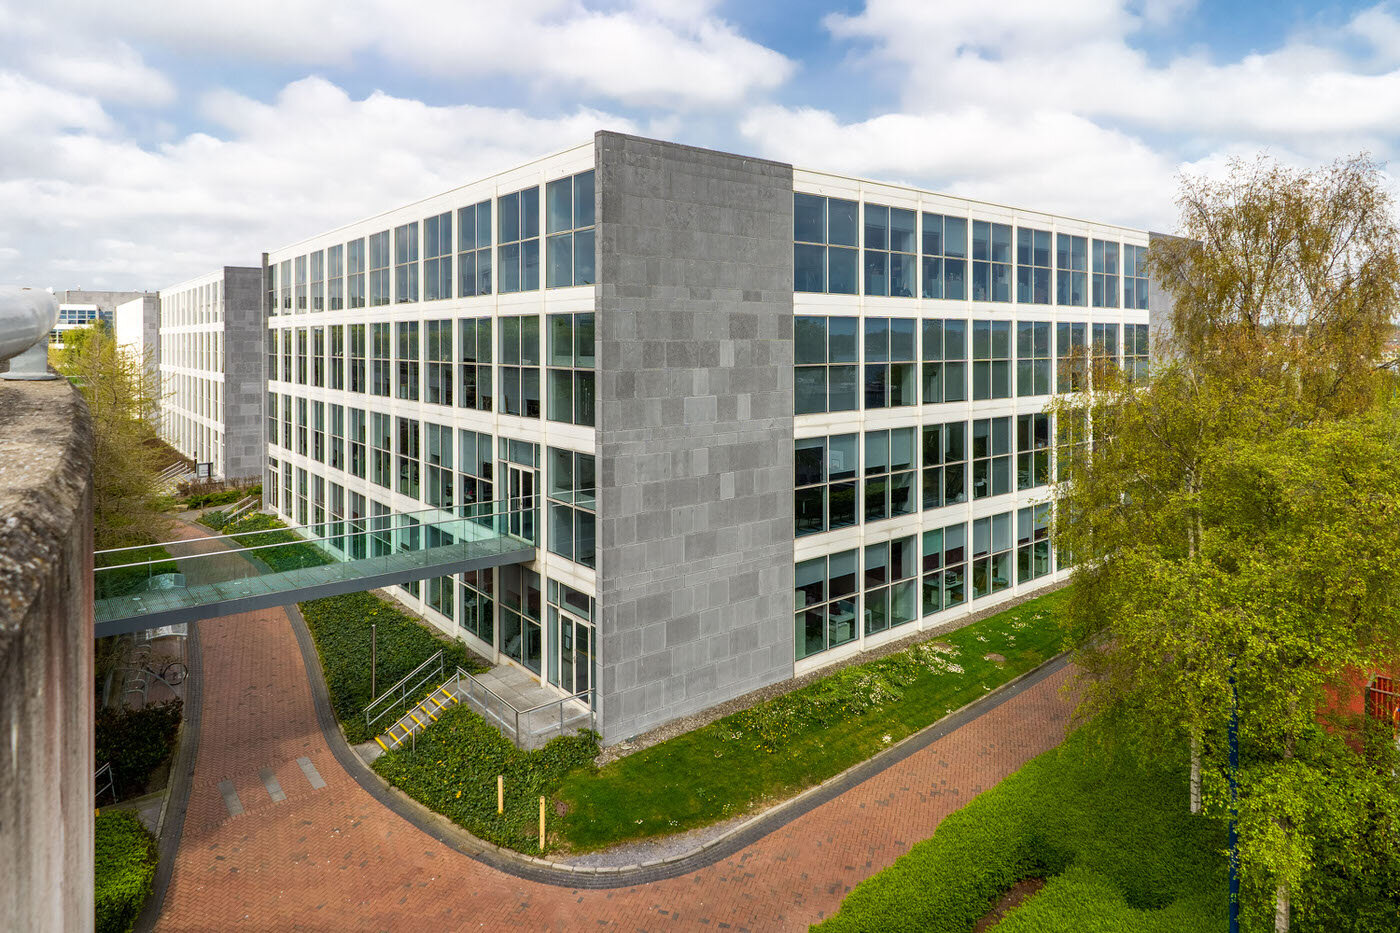  East Point Business Park Dublin Ireland. Commercial property photography by Roger Kenny. 